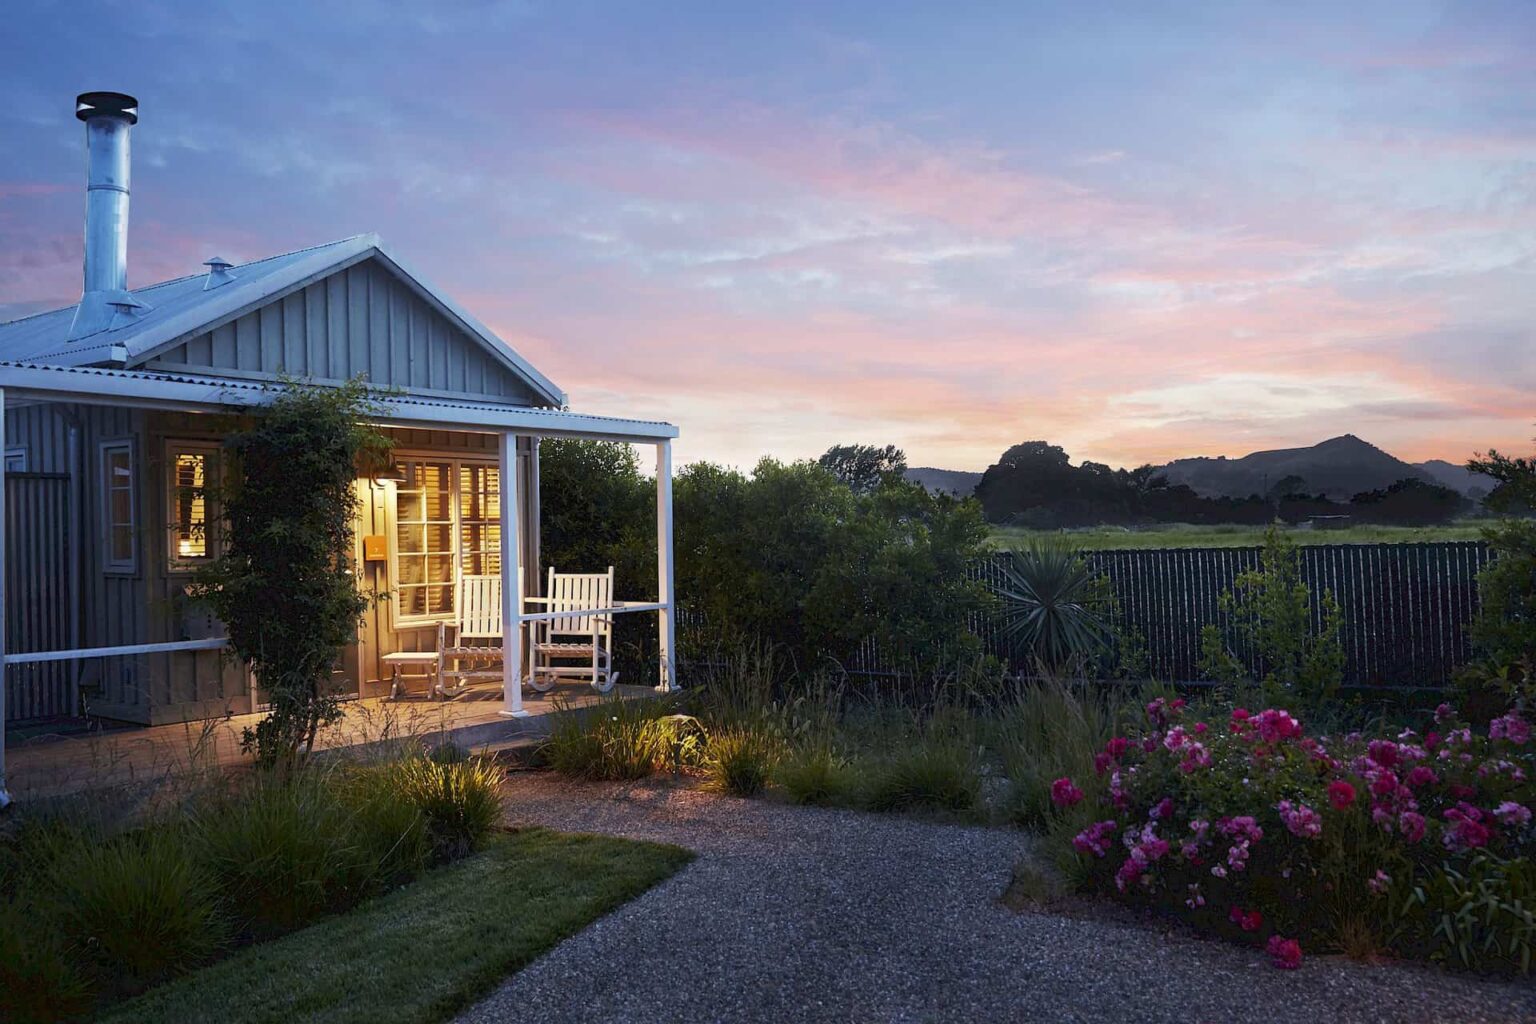 Private cottage at Carneros Resort & Spa at sunset